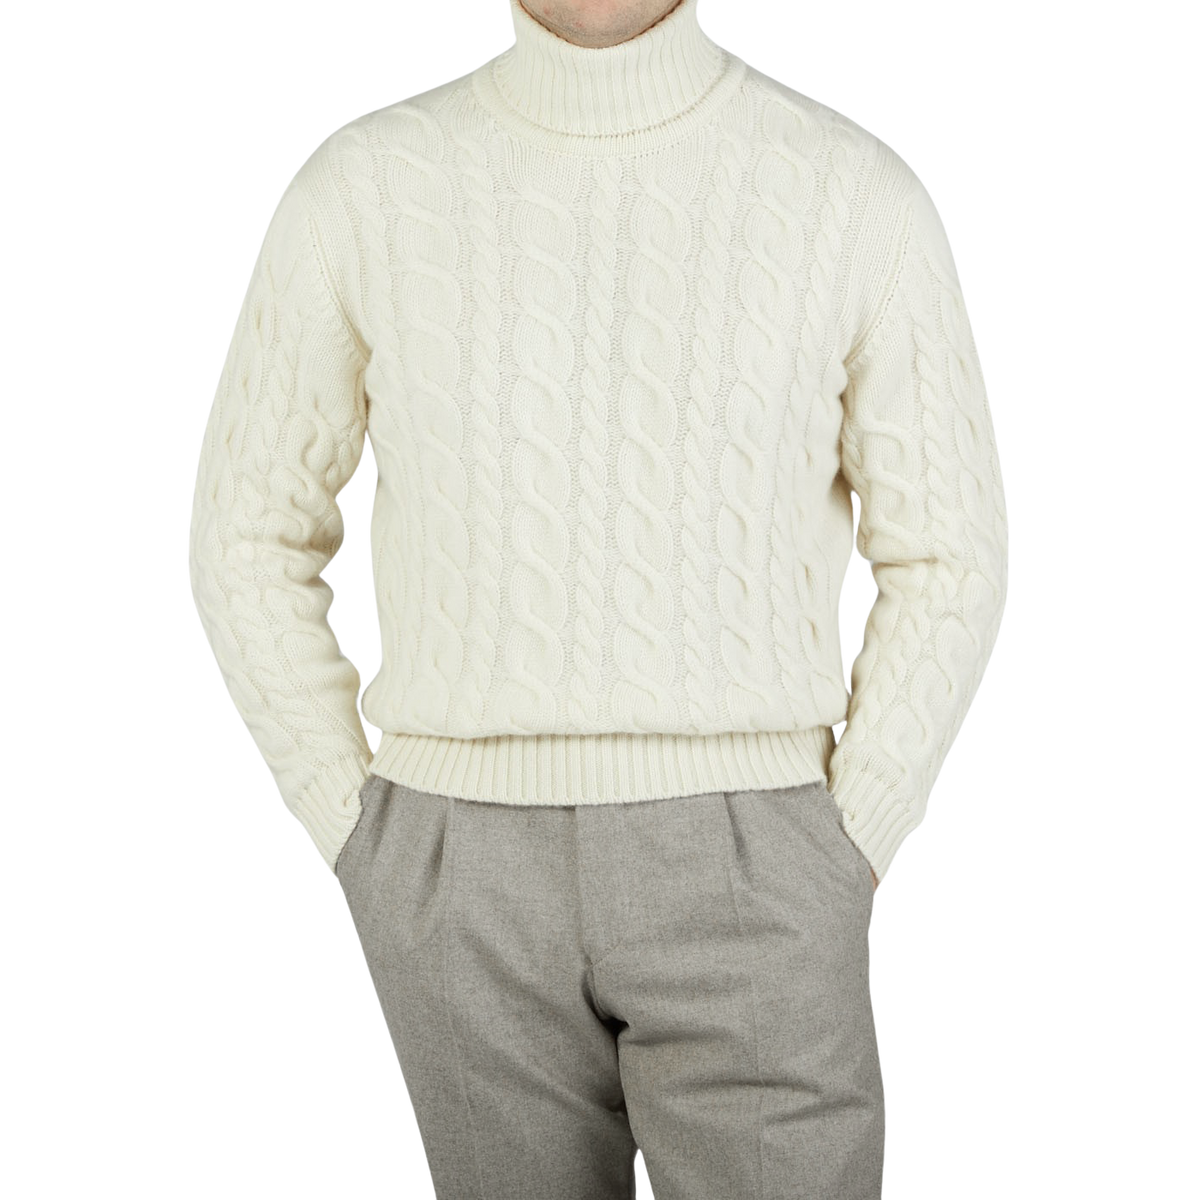 William Lockie, a man wearing an Ecru Cable Knit Pure Cashmere Rollneck sweater made by William Lockie.